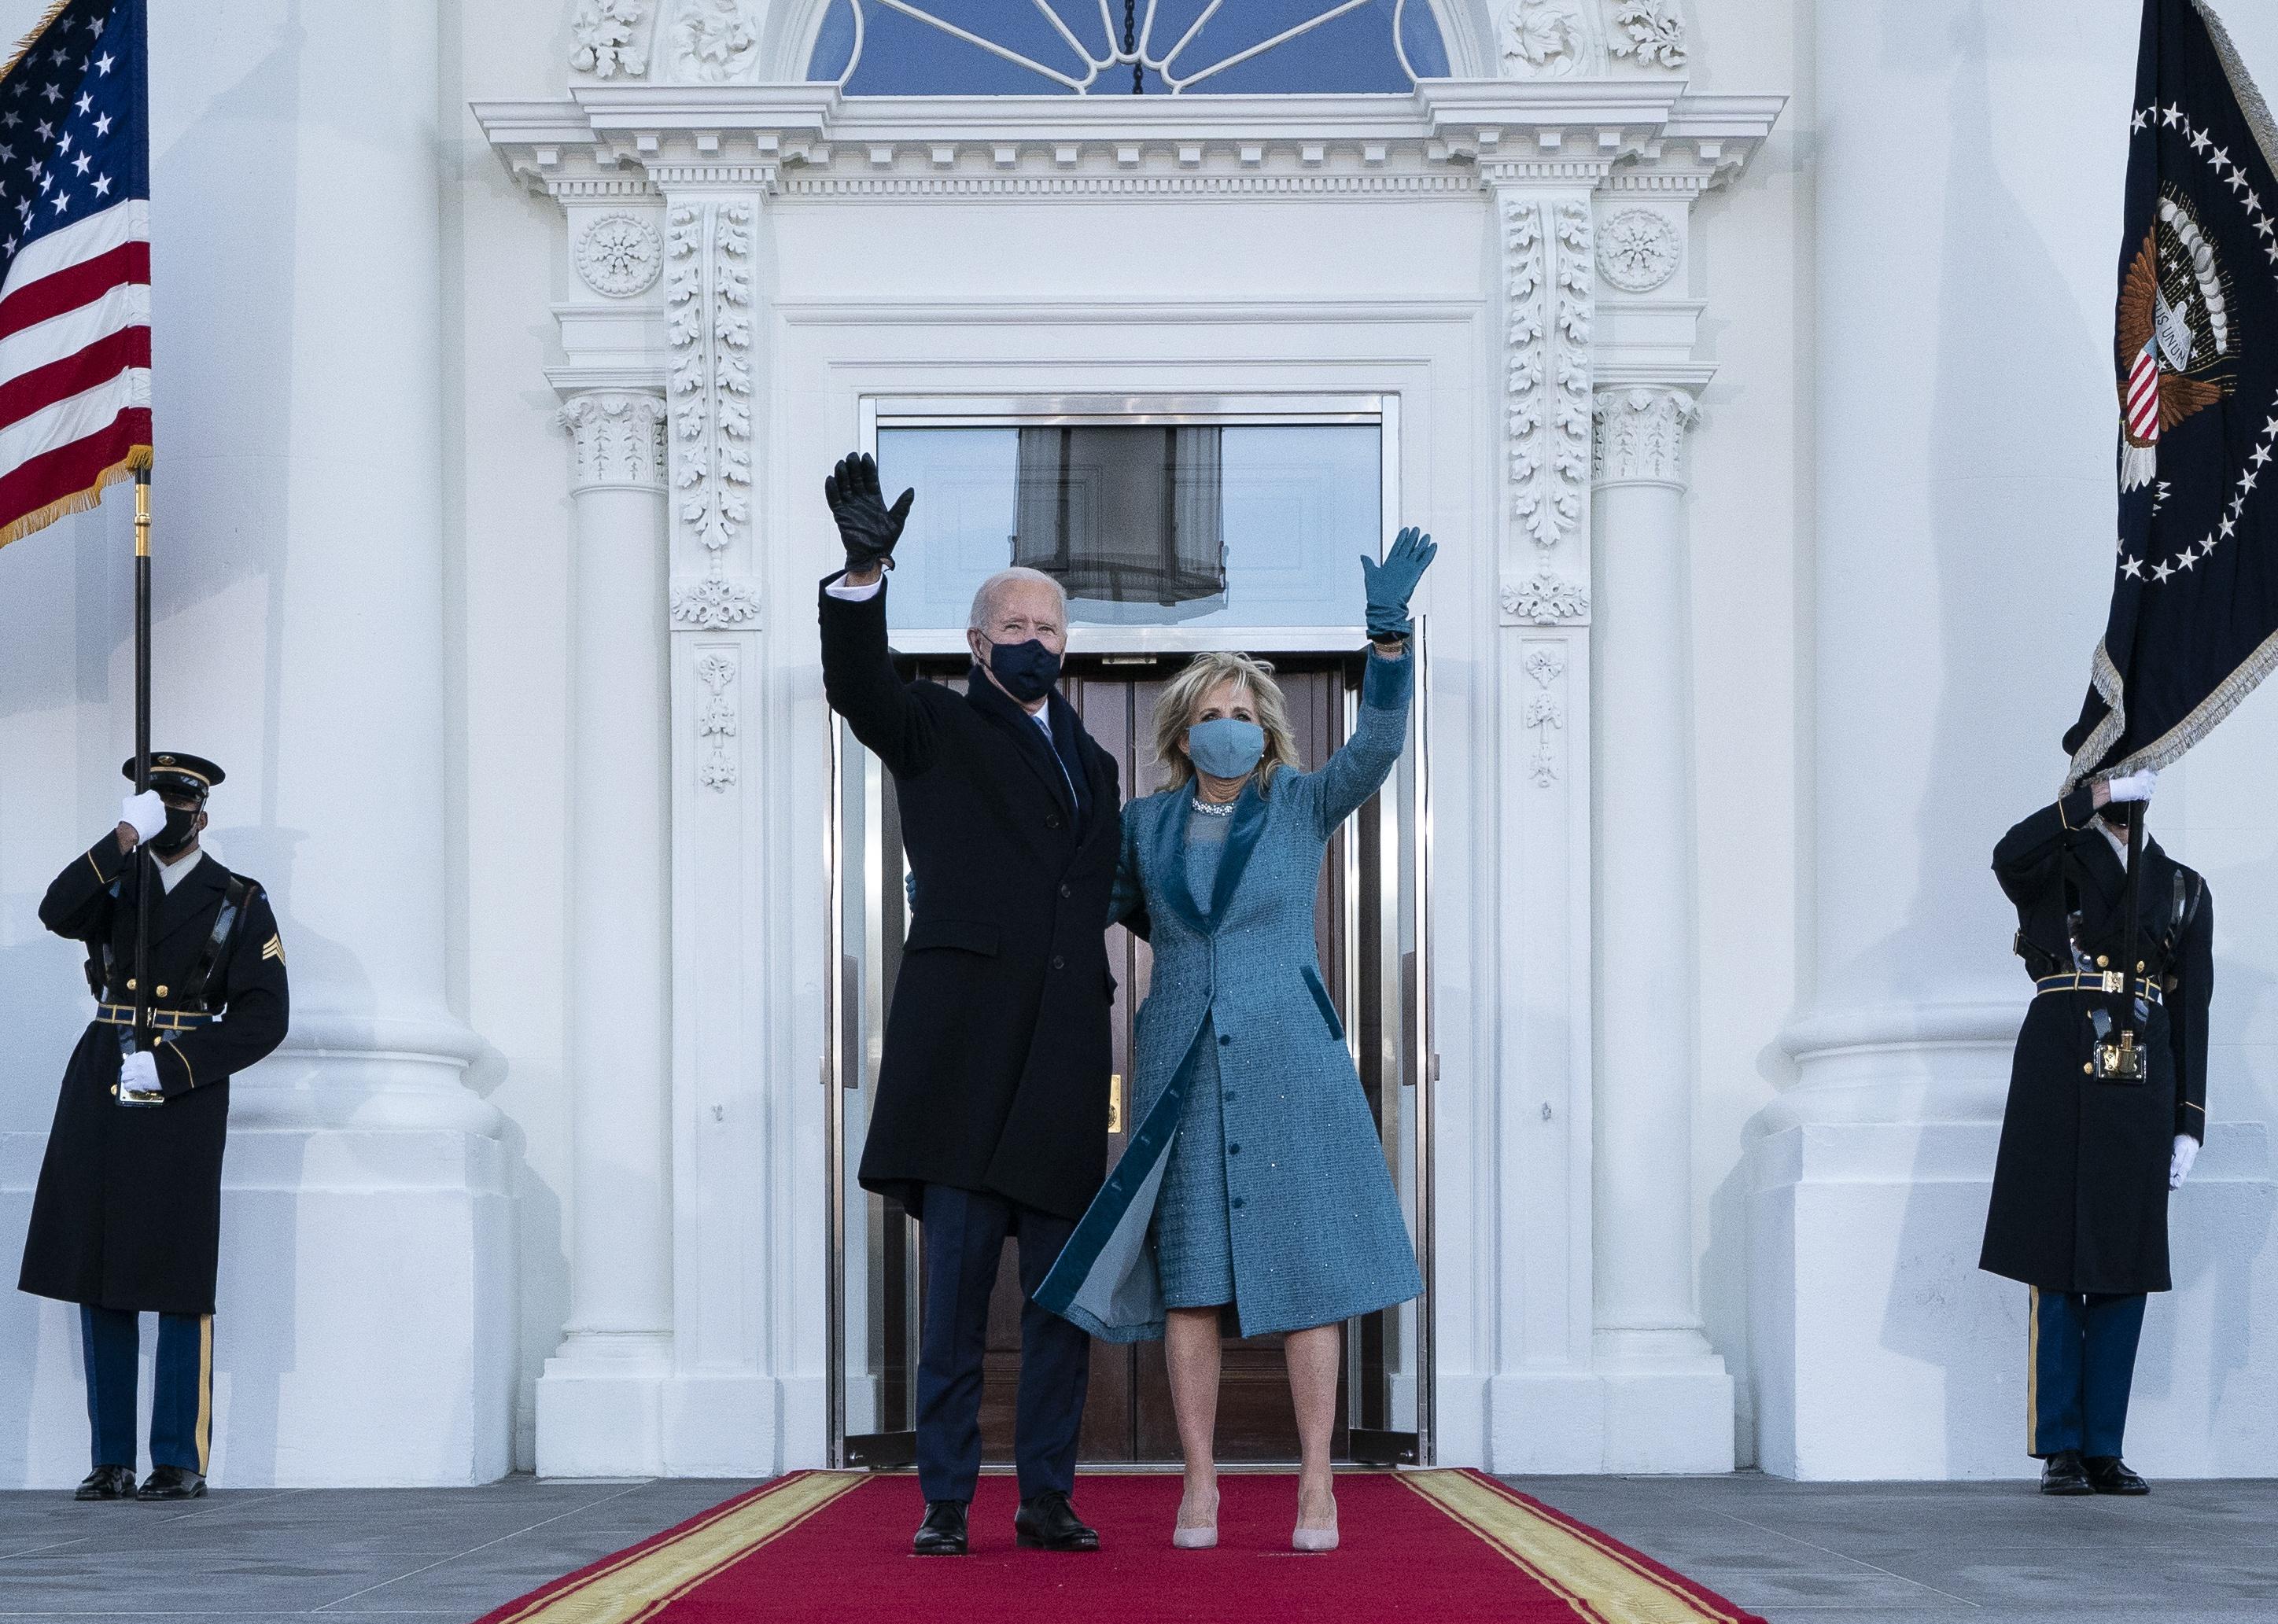 President Joe Biden and first lady Dr. Jill Biden wave as they arrive at the North Portico of the White House.